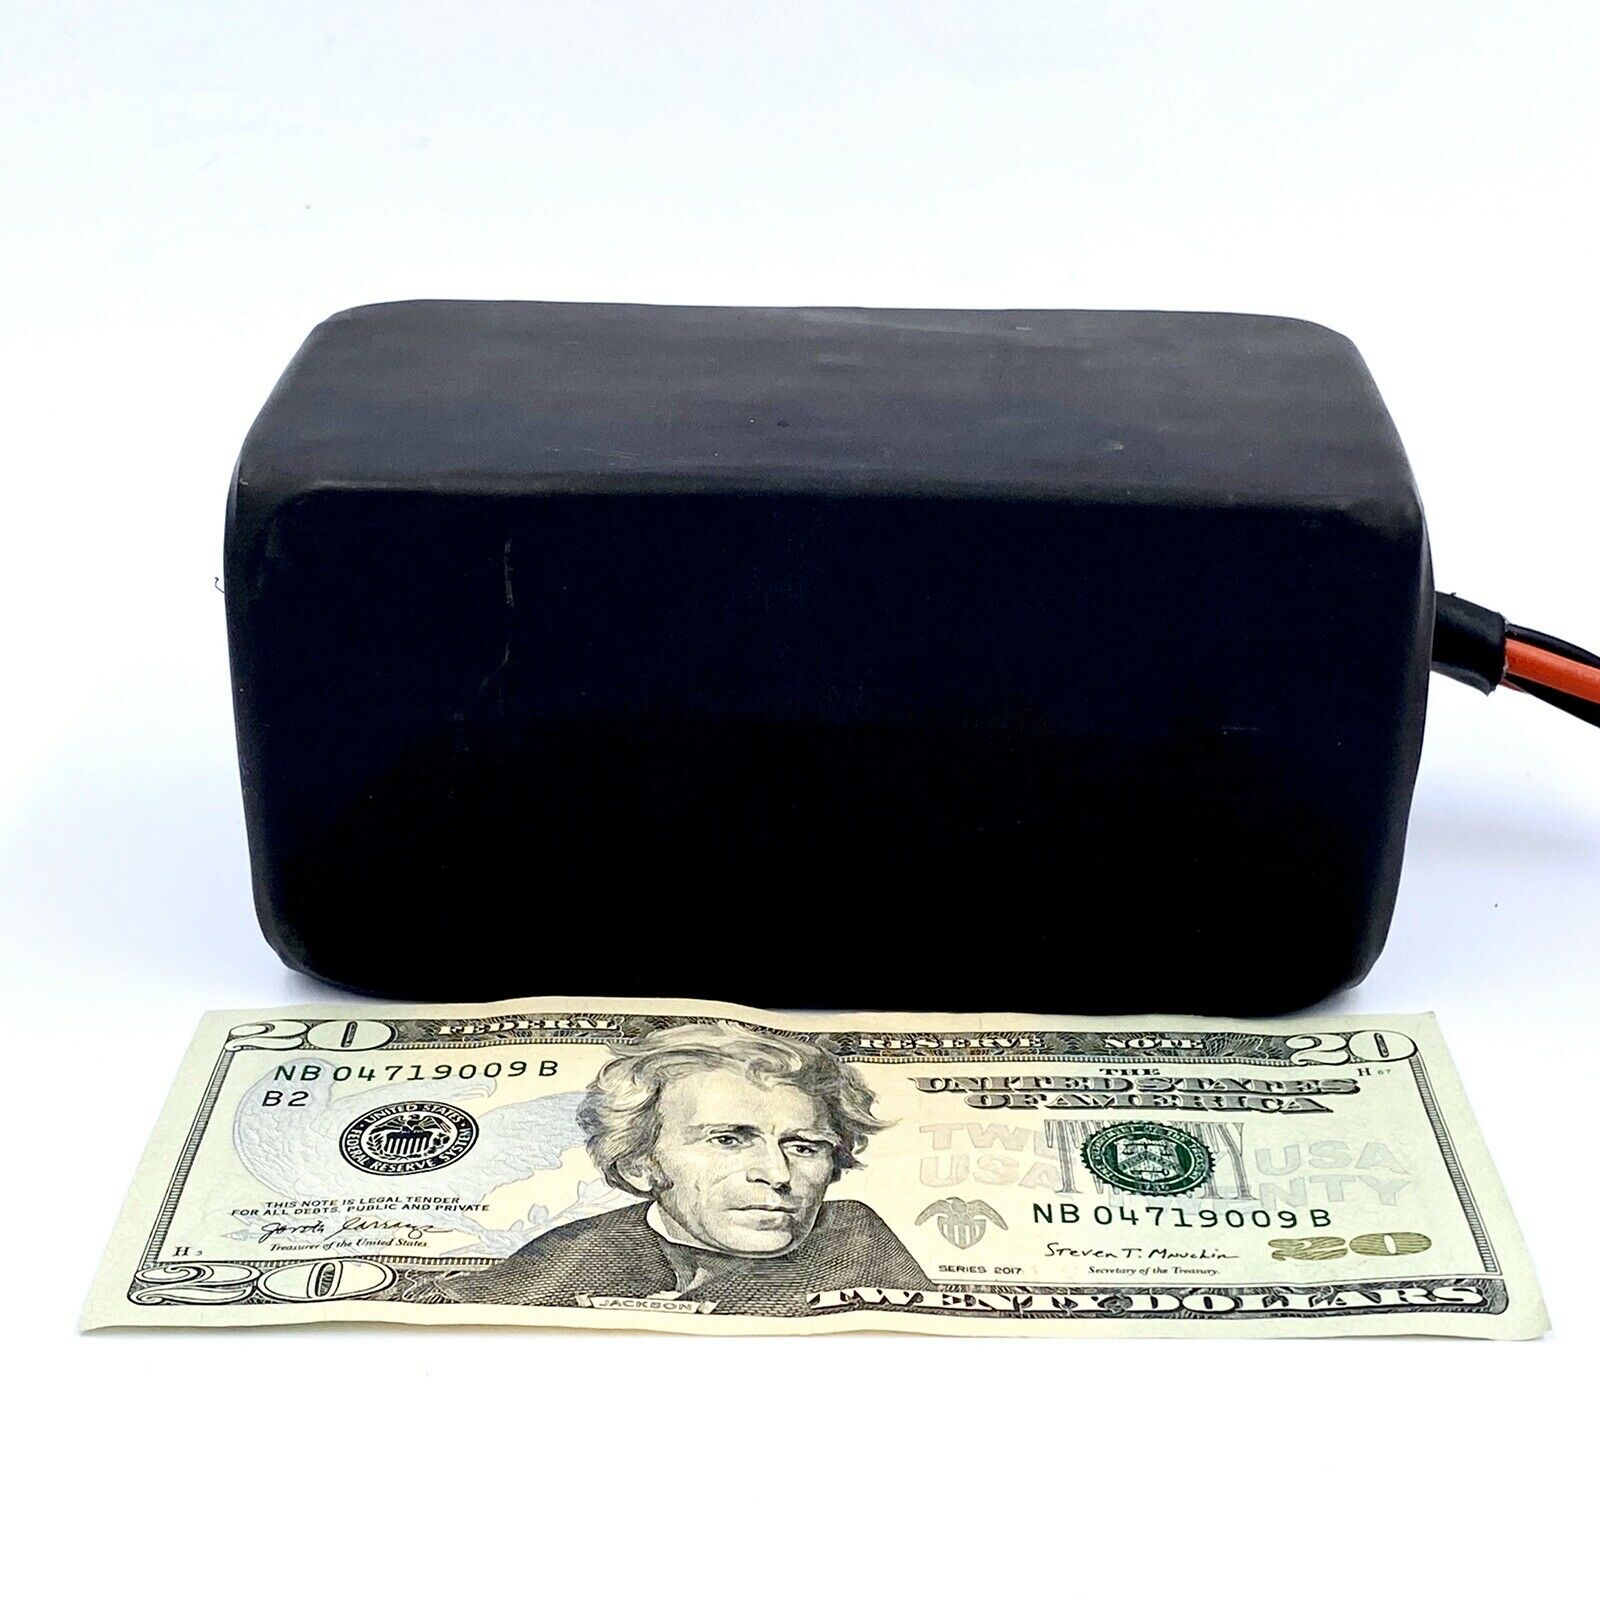 A black box with a dollar bill on top of it